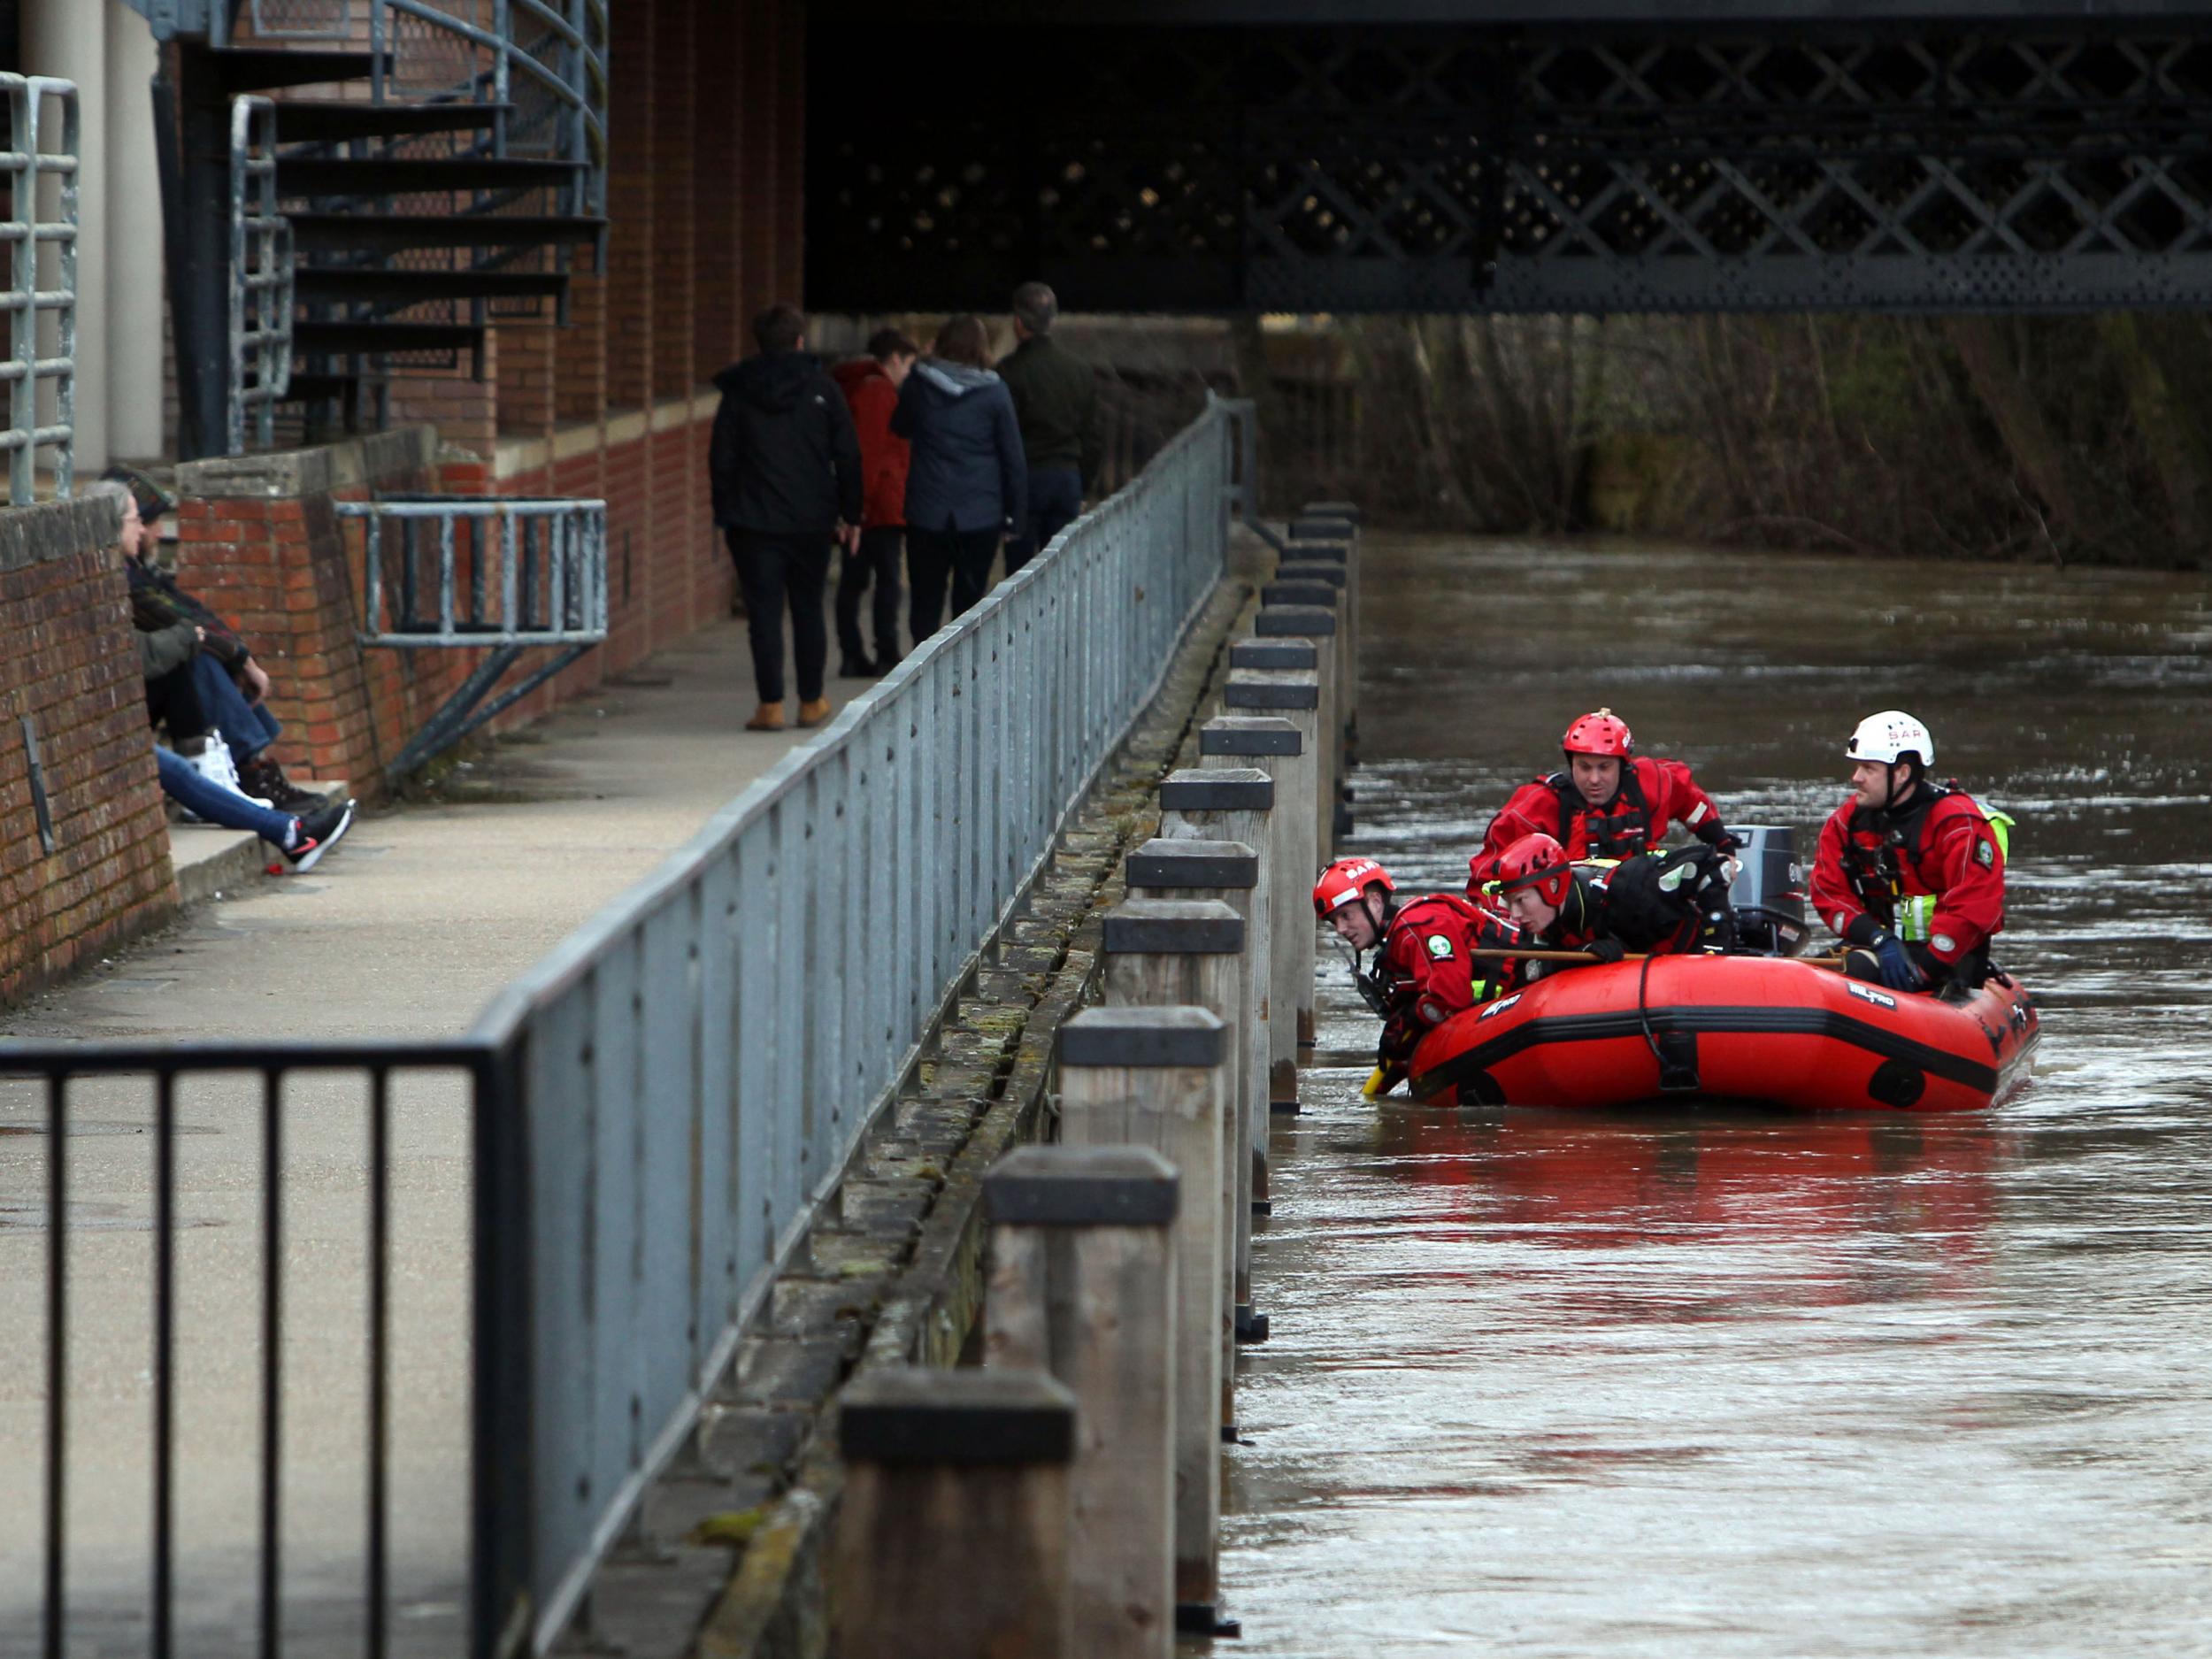 Police search on the River Wey in Guildford, Surrey, after Grant Broster's kayak capsized on 28 March